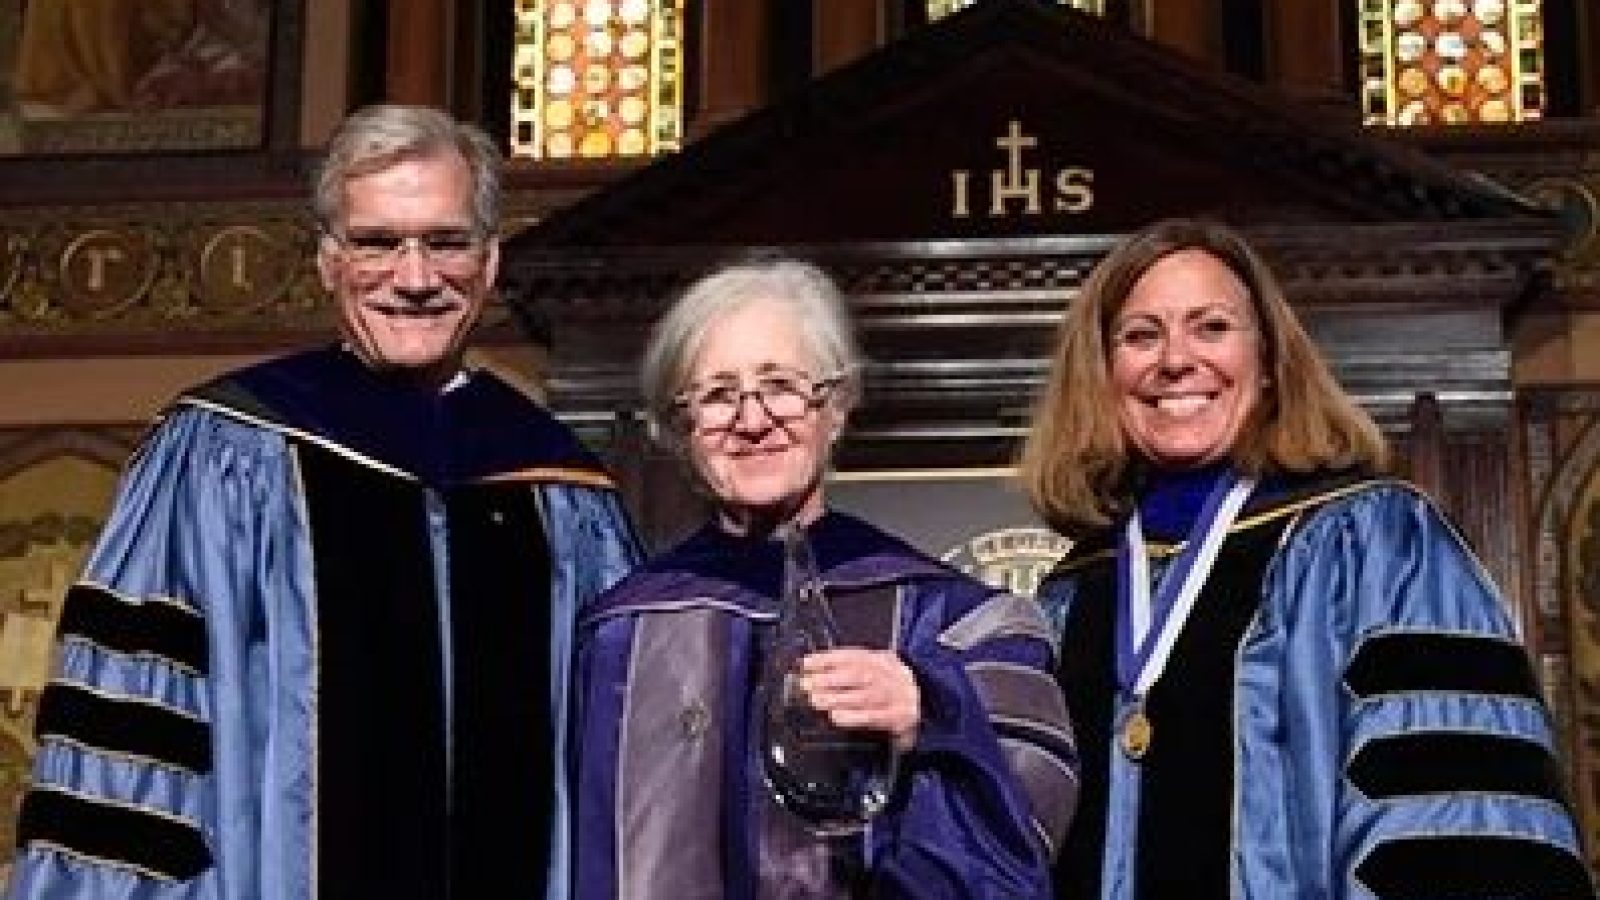 Professor Maxine Weinstein (center) wears a purple graduation robe at a commencement. She stands on the stage of Gaston Hall next to Provost Robert Groves, who wears a blue graduation robe with three black stripes on the sleeves, and another woman wearing a blue graduation robe with three black stripes on the sleeves.